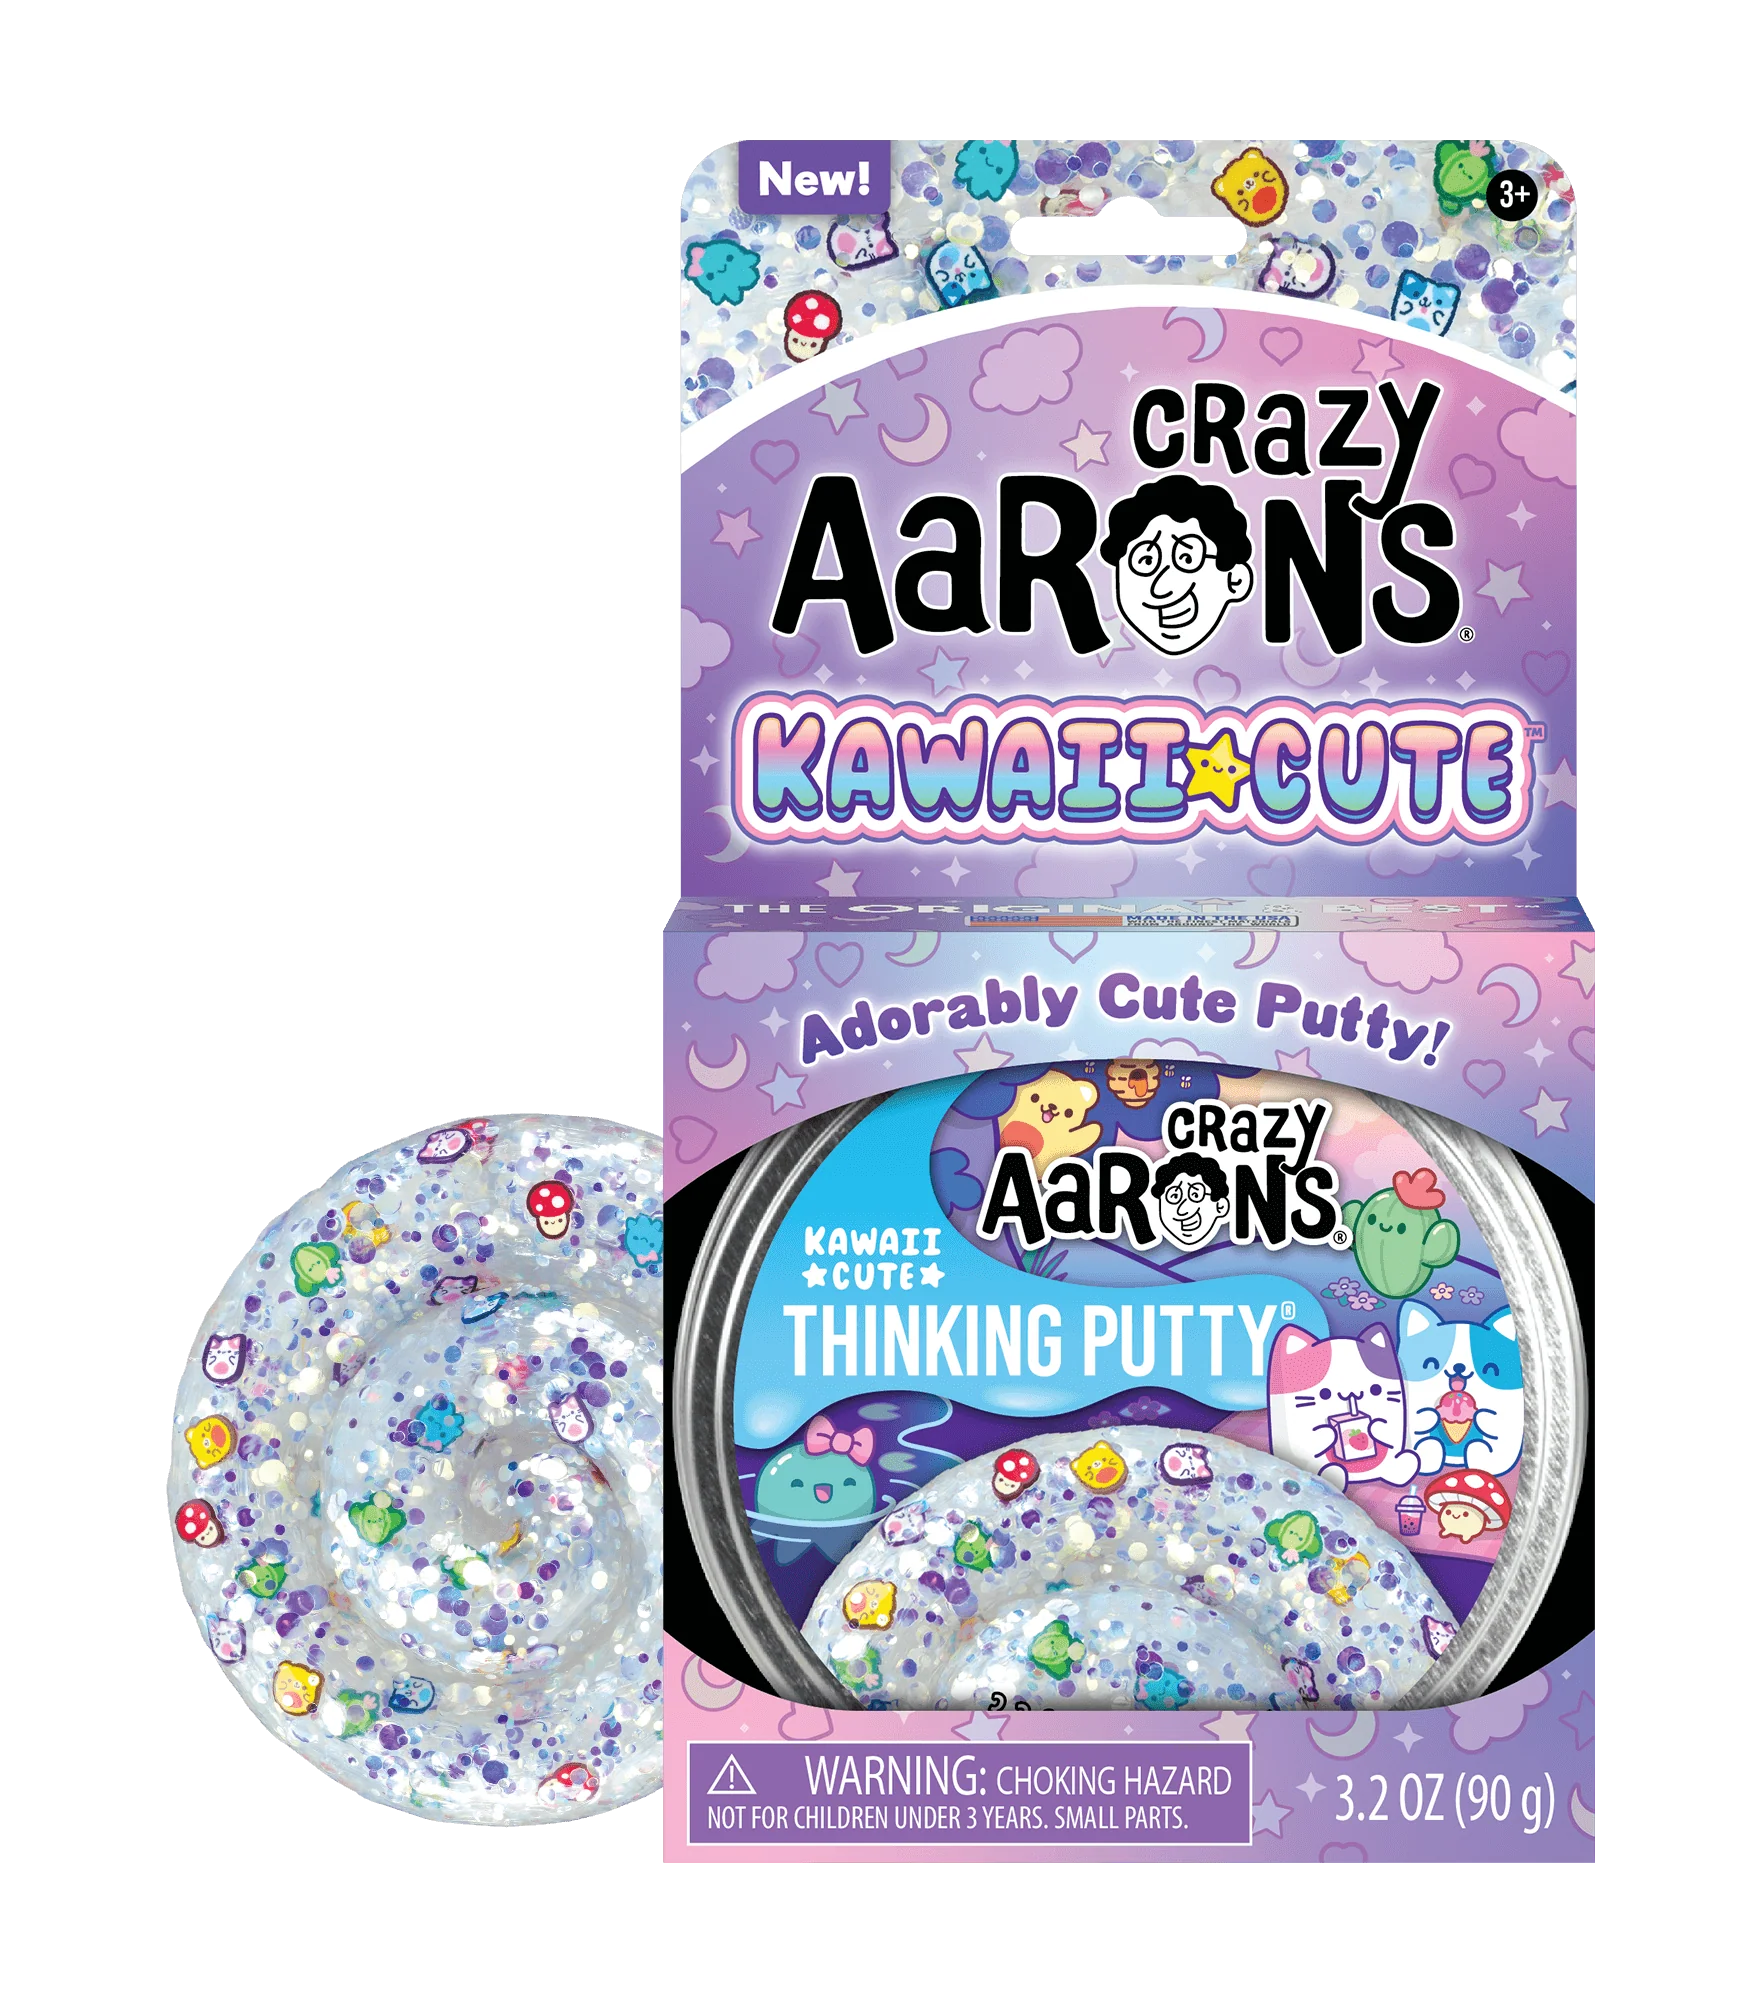 Kawaii Cute 4” Thinking Putty by Crazy Aaron’s #KC020